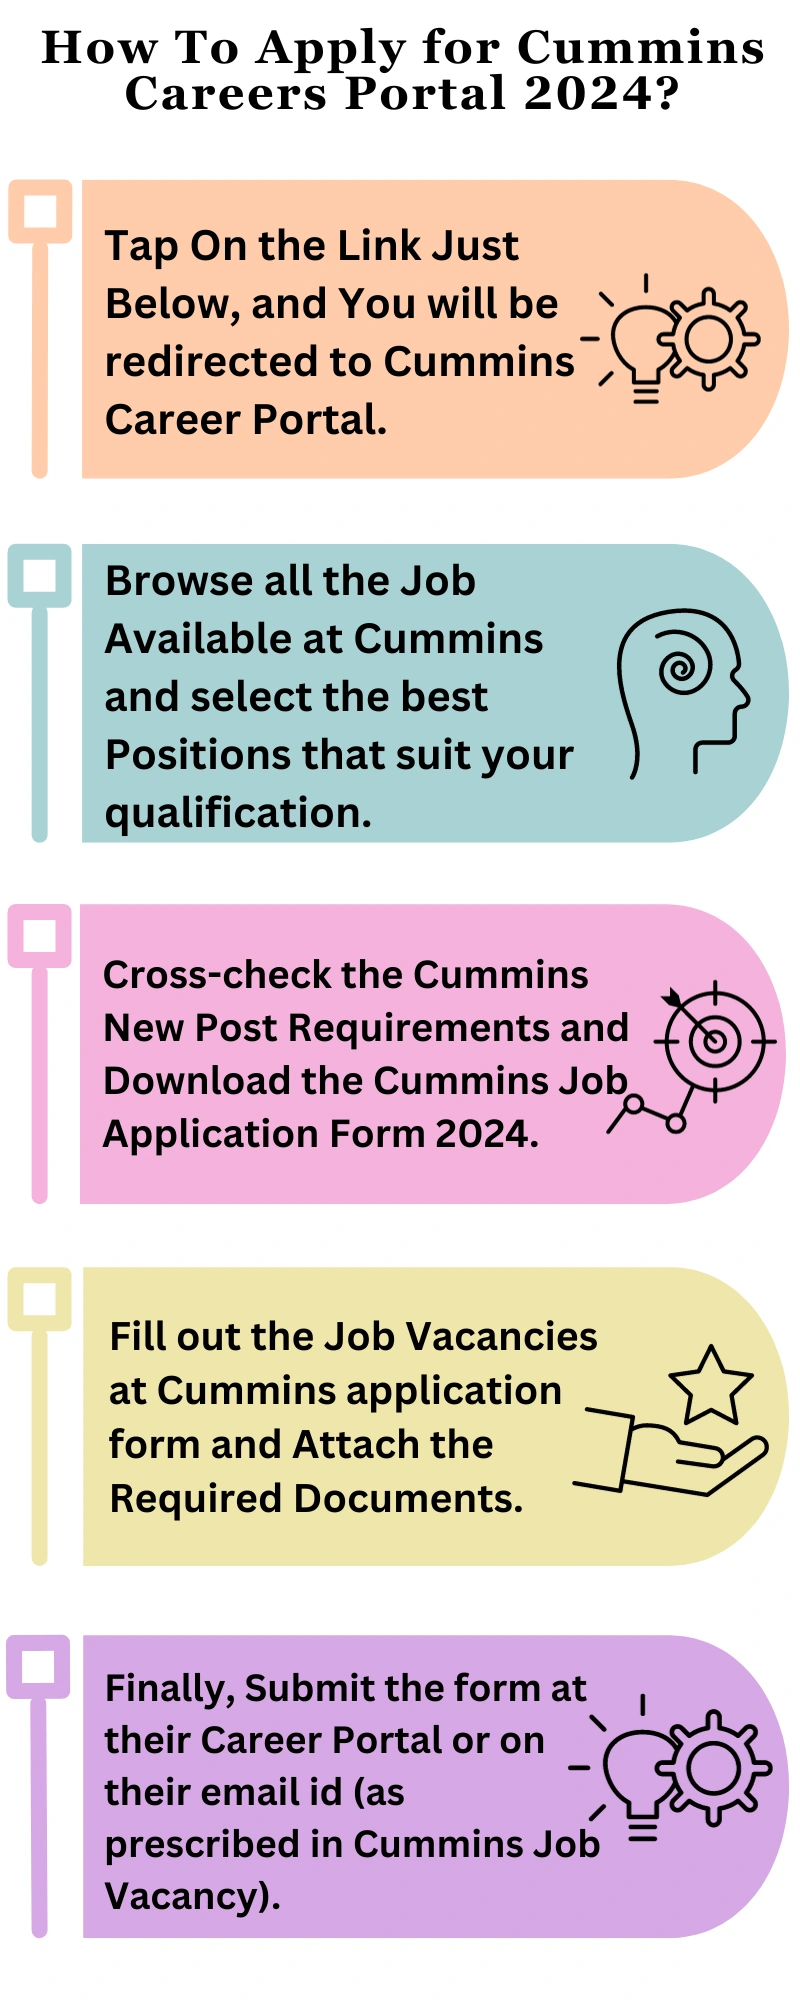 How To Apply for Cummins Careers Portal 2024?